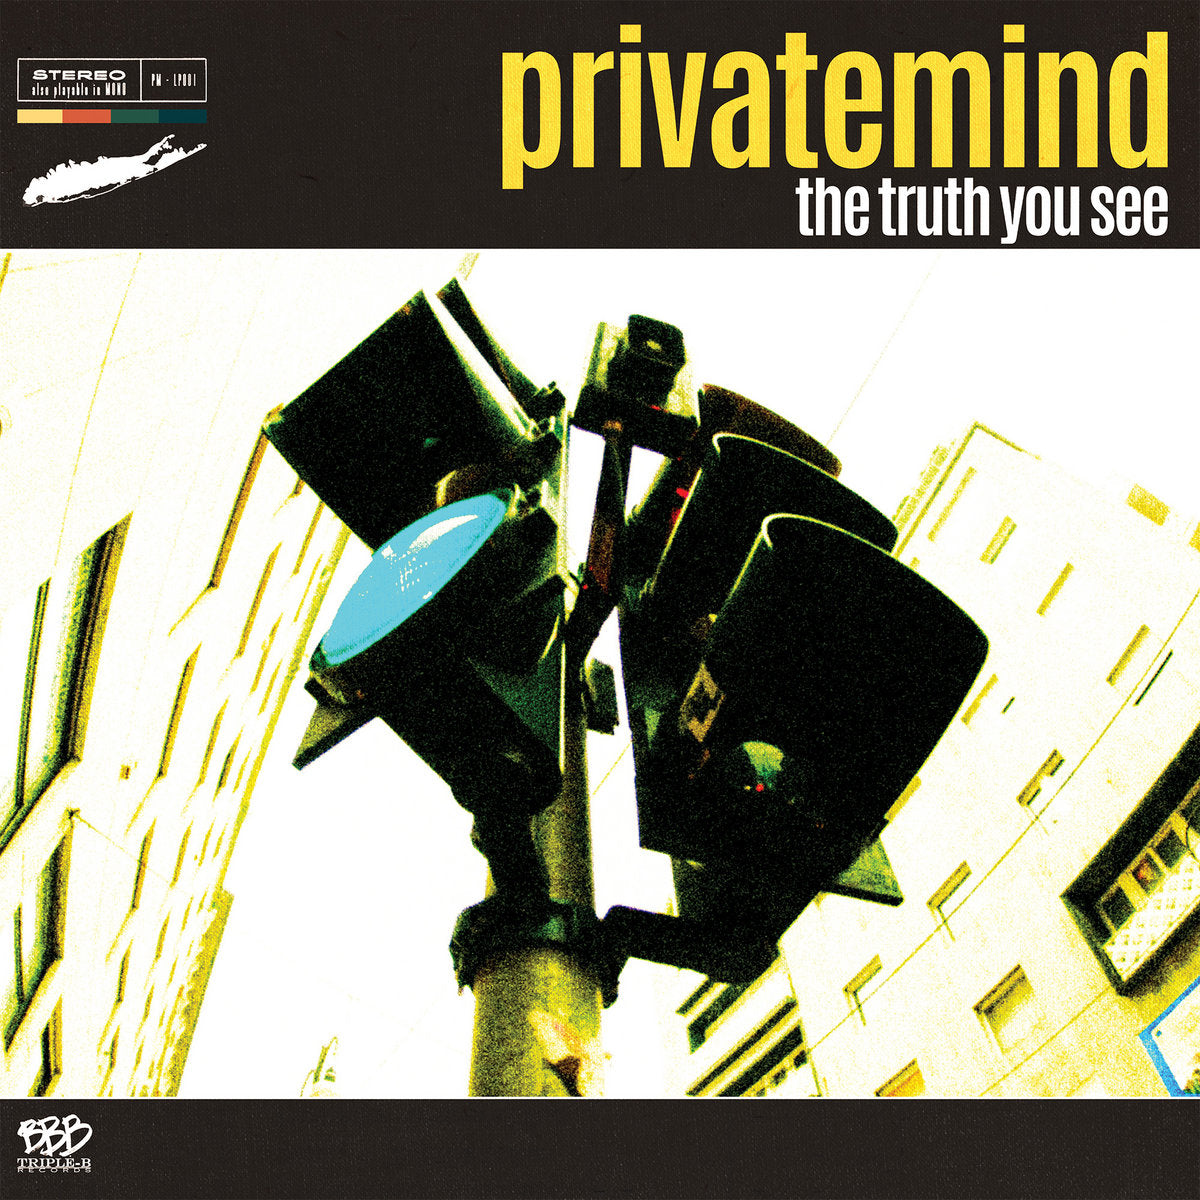 Private Mind  "The Truth You See" LP